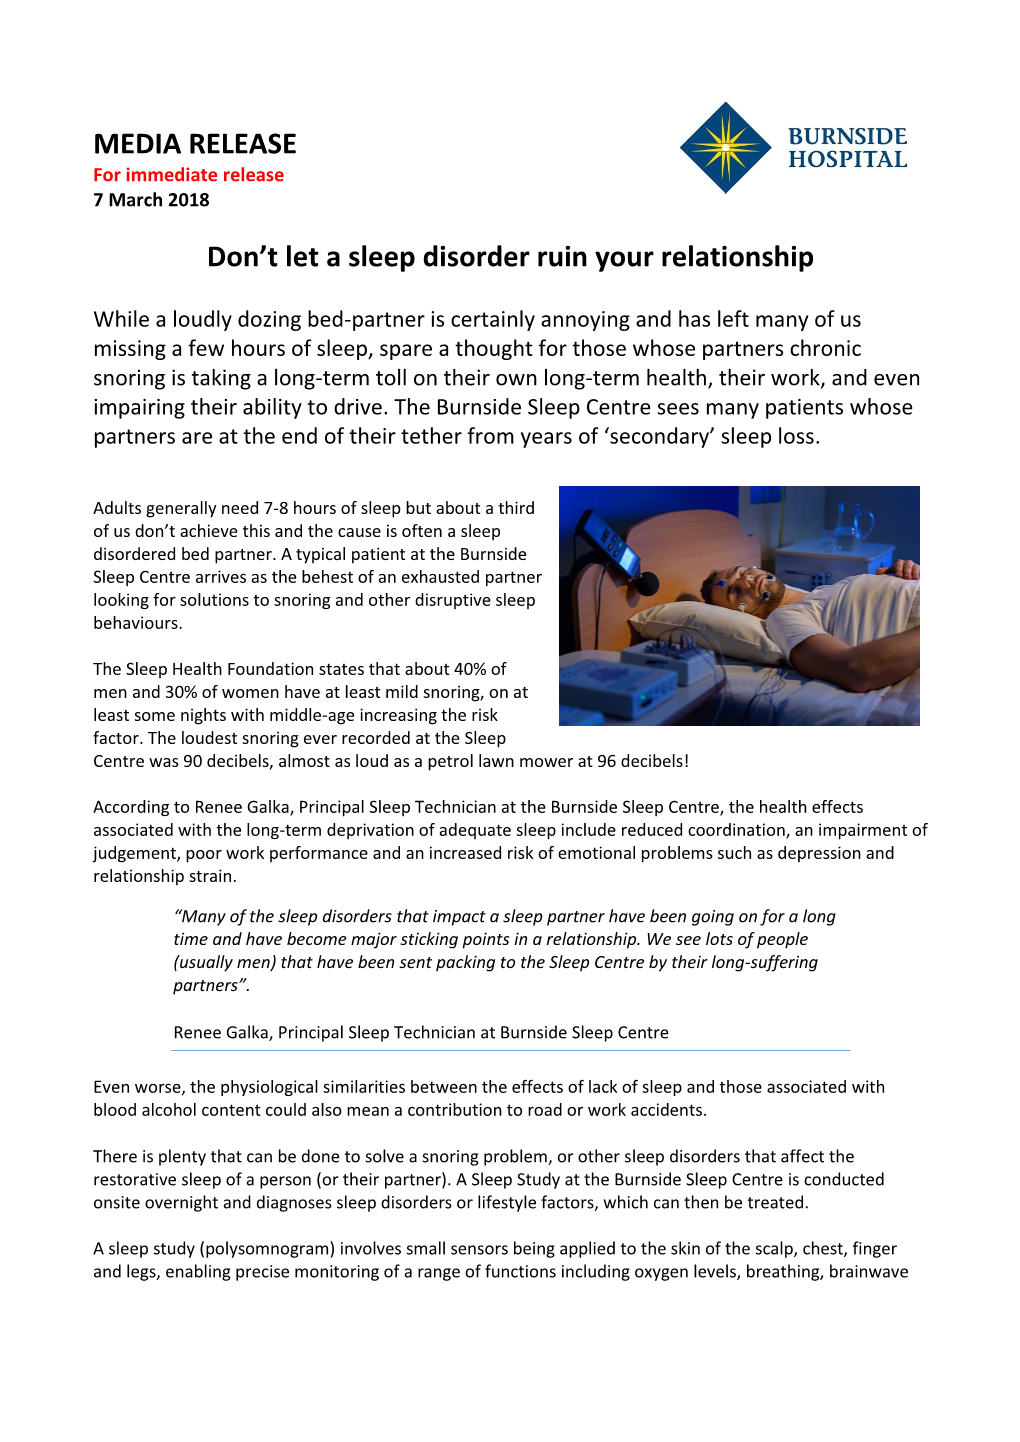 MEDIA RELEASE Don't Let a Sleep Disorder Ruin Your Relationship